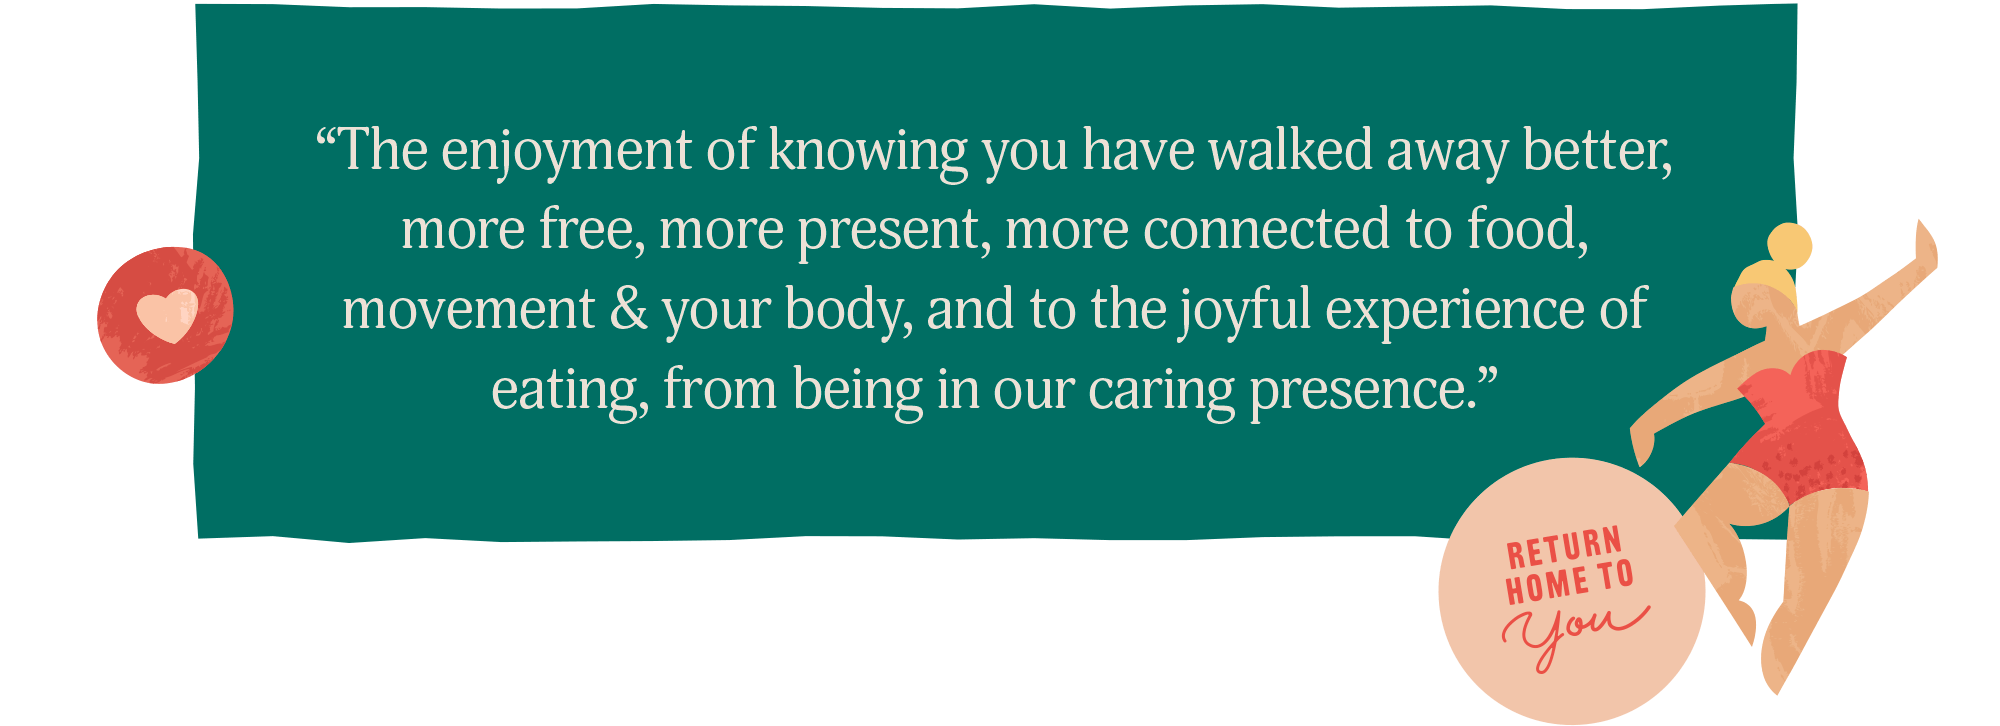 "The enjoyment of knowing you have walked away better, more free, more present, more connected to food, movement & your body, and to the joyful experience of eating, from being in our caring presence."